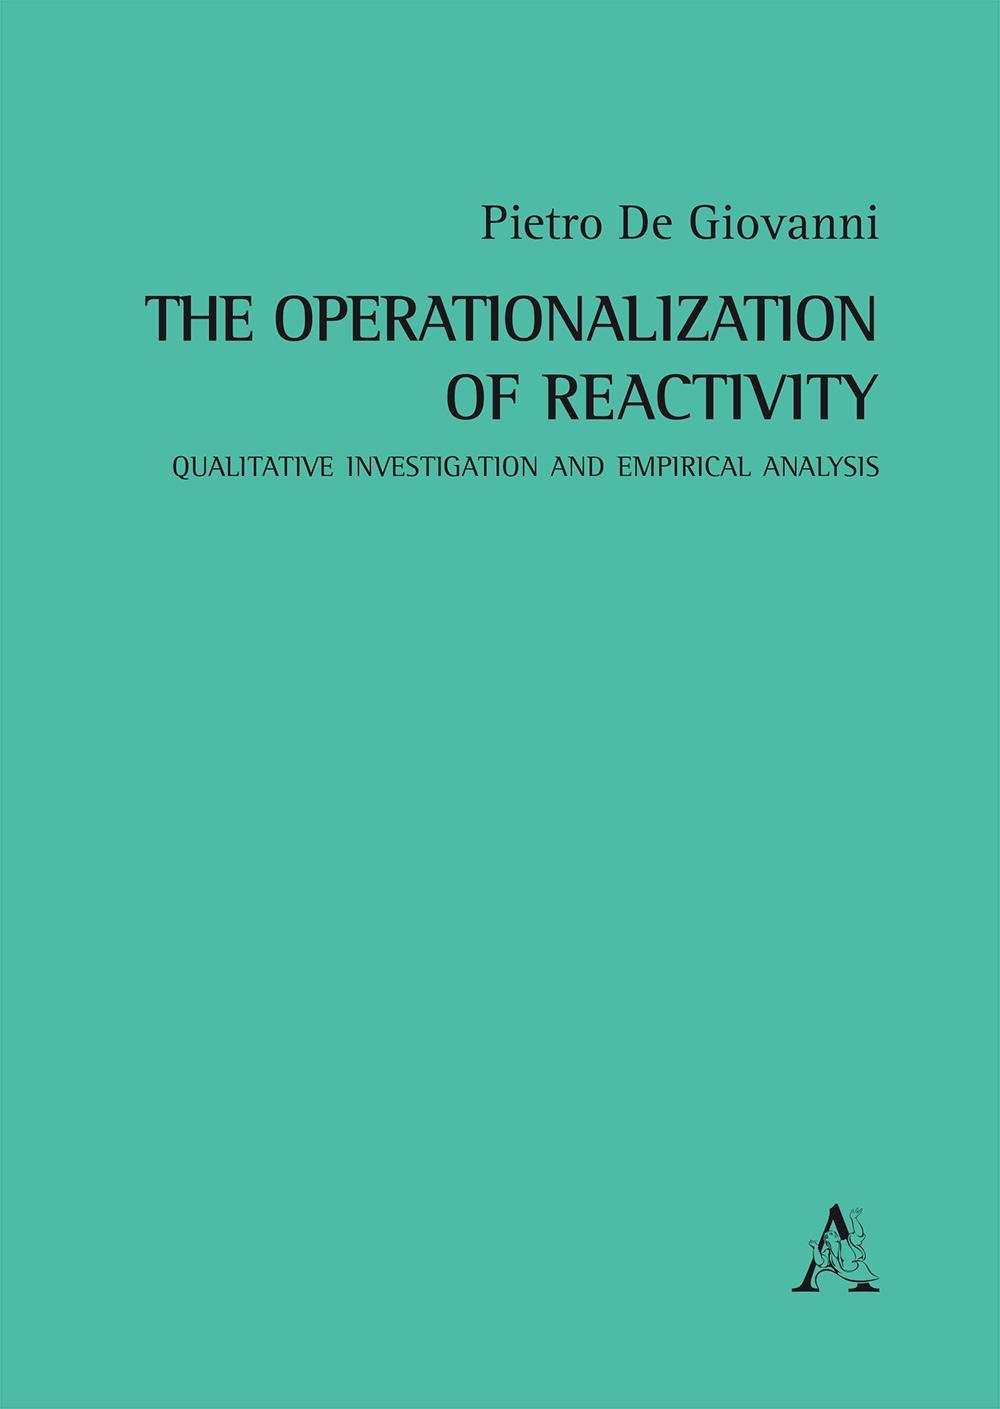 The operationalization of reactivity. Qualitative investigation and empirical analysis